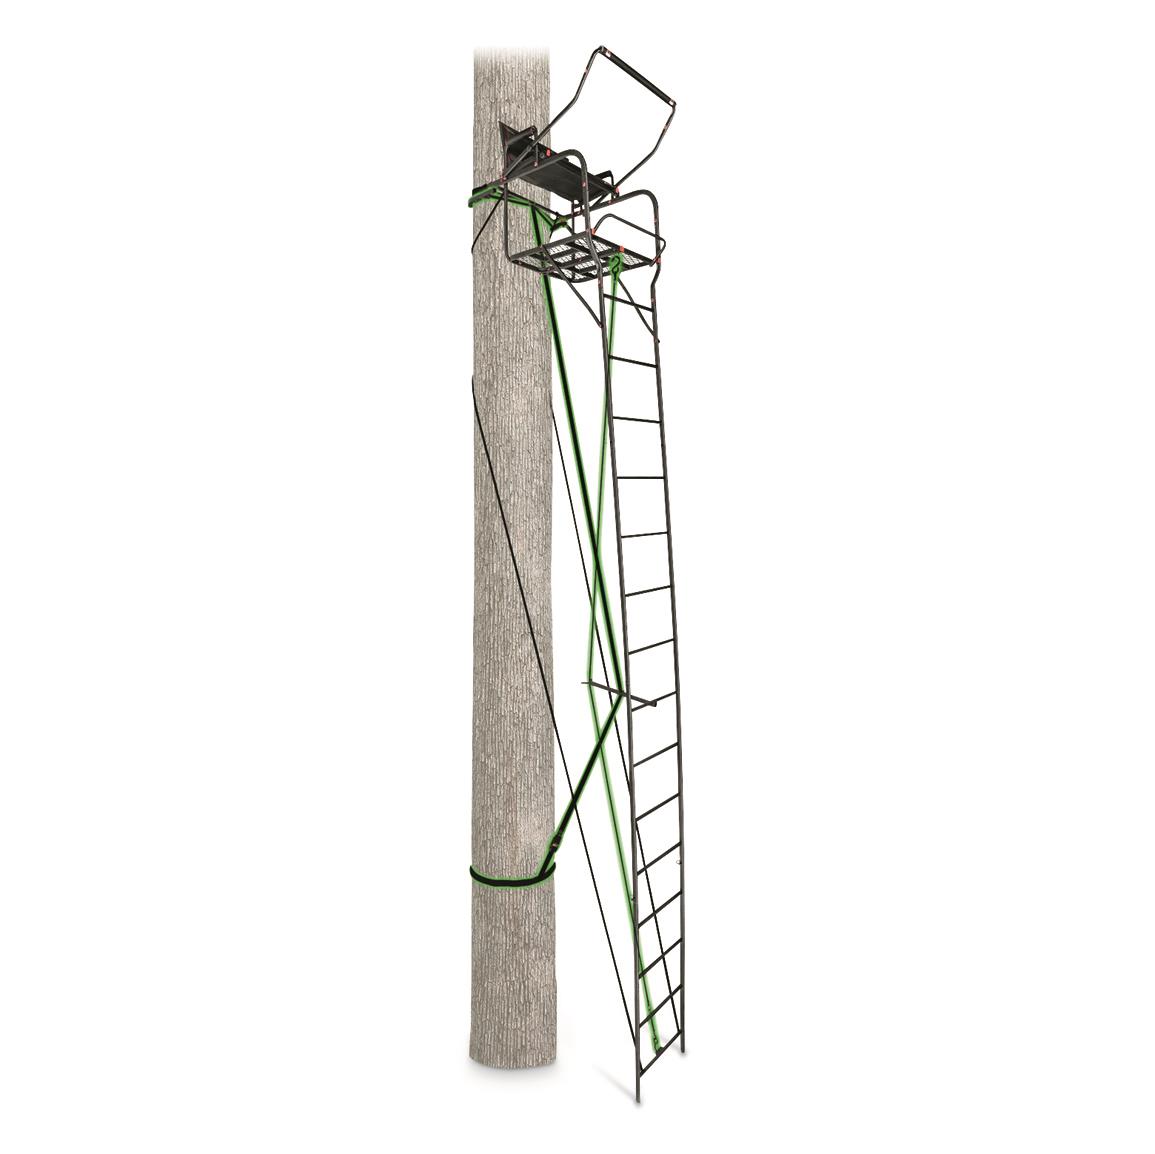 Primal Tree Stands Mac Daddy Xtra Wide Deluxe 22' Ladder Tree Stand, Jaw And Truss Stabilizer System